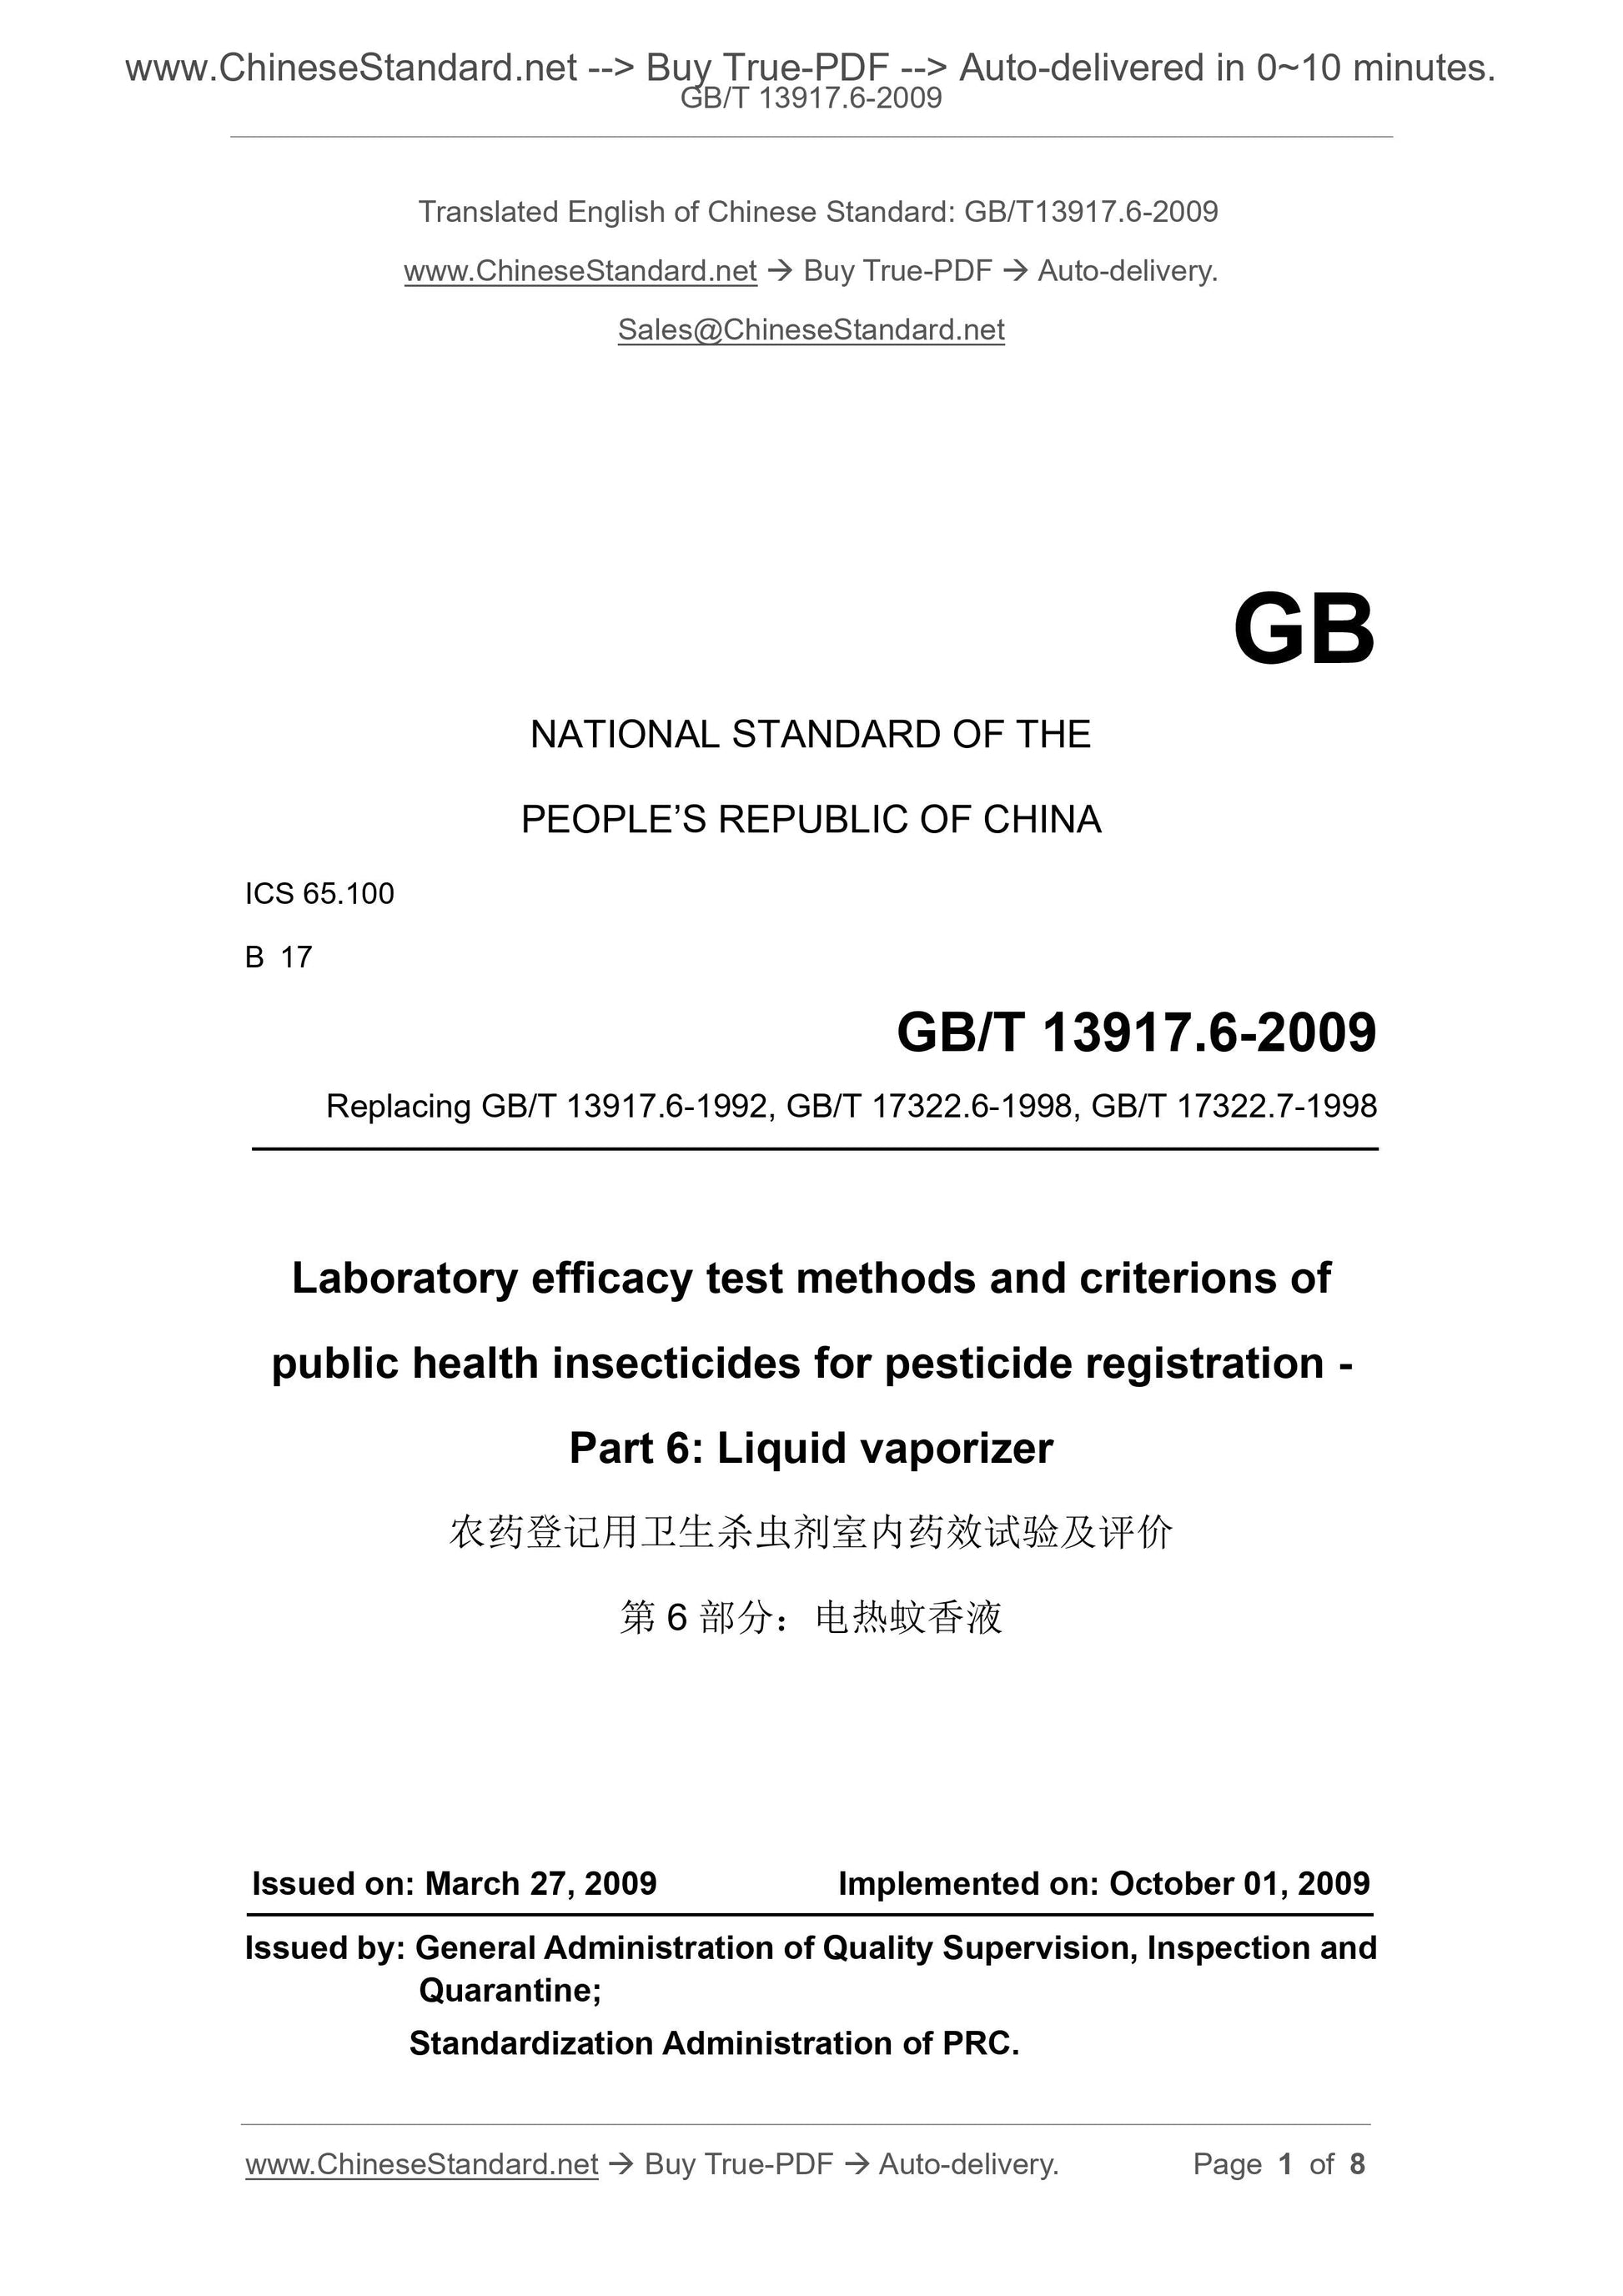 GB/T 13917.6-2009 Page 1